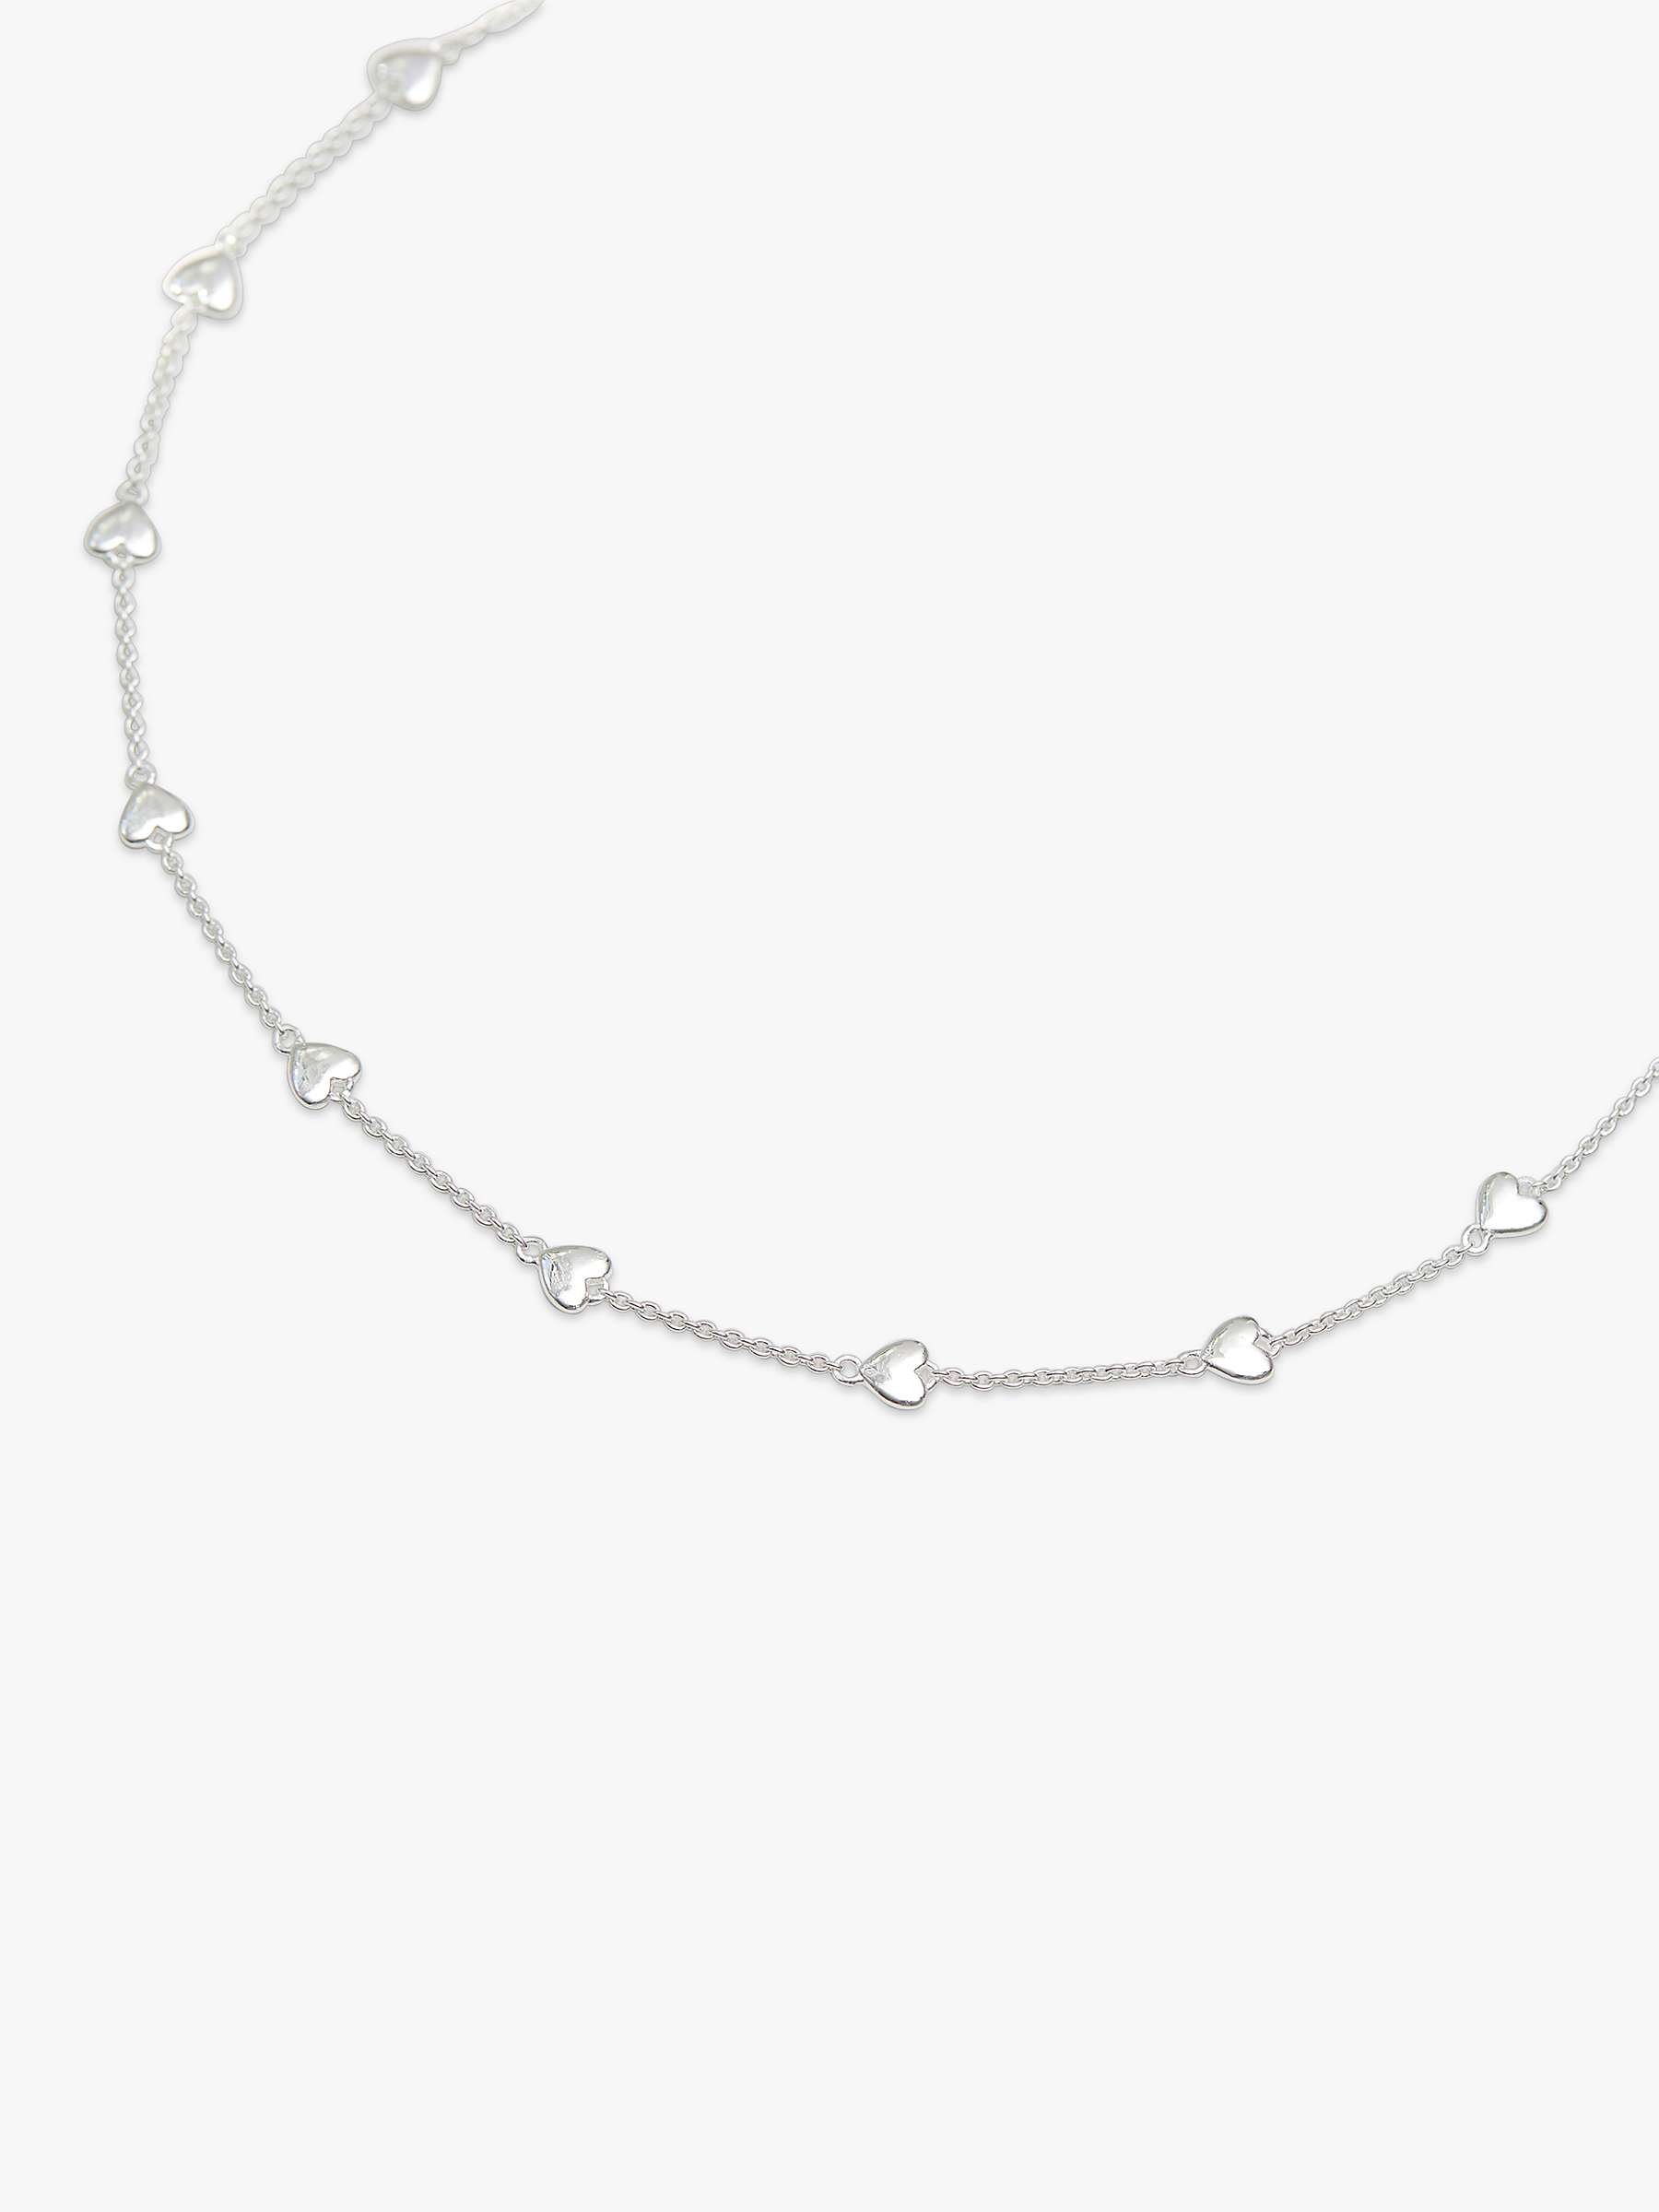 Buy Simply Silver Polished Heart Station Necklace, Silver Online at johnlewis.com